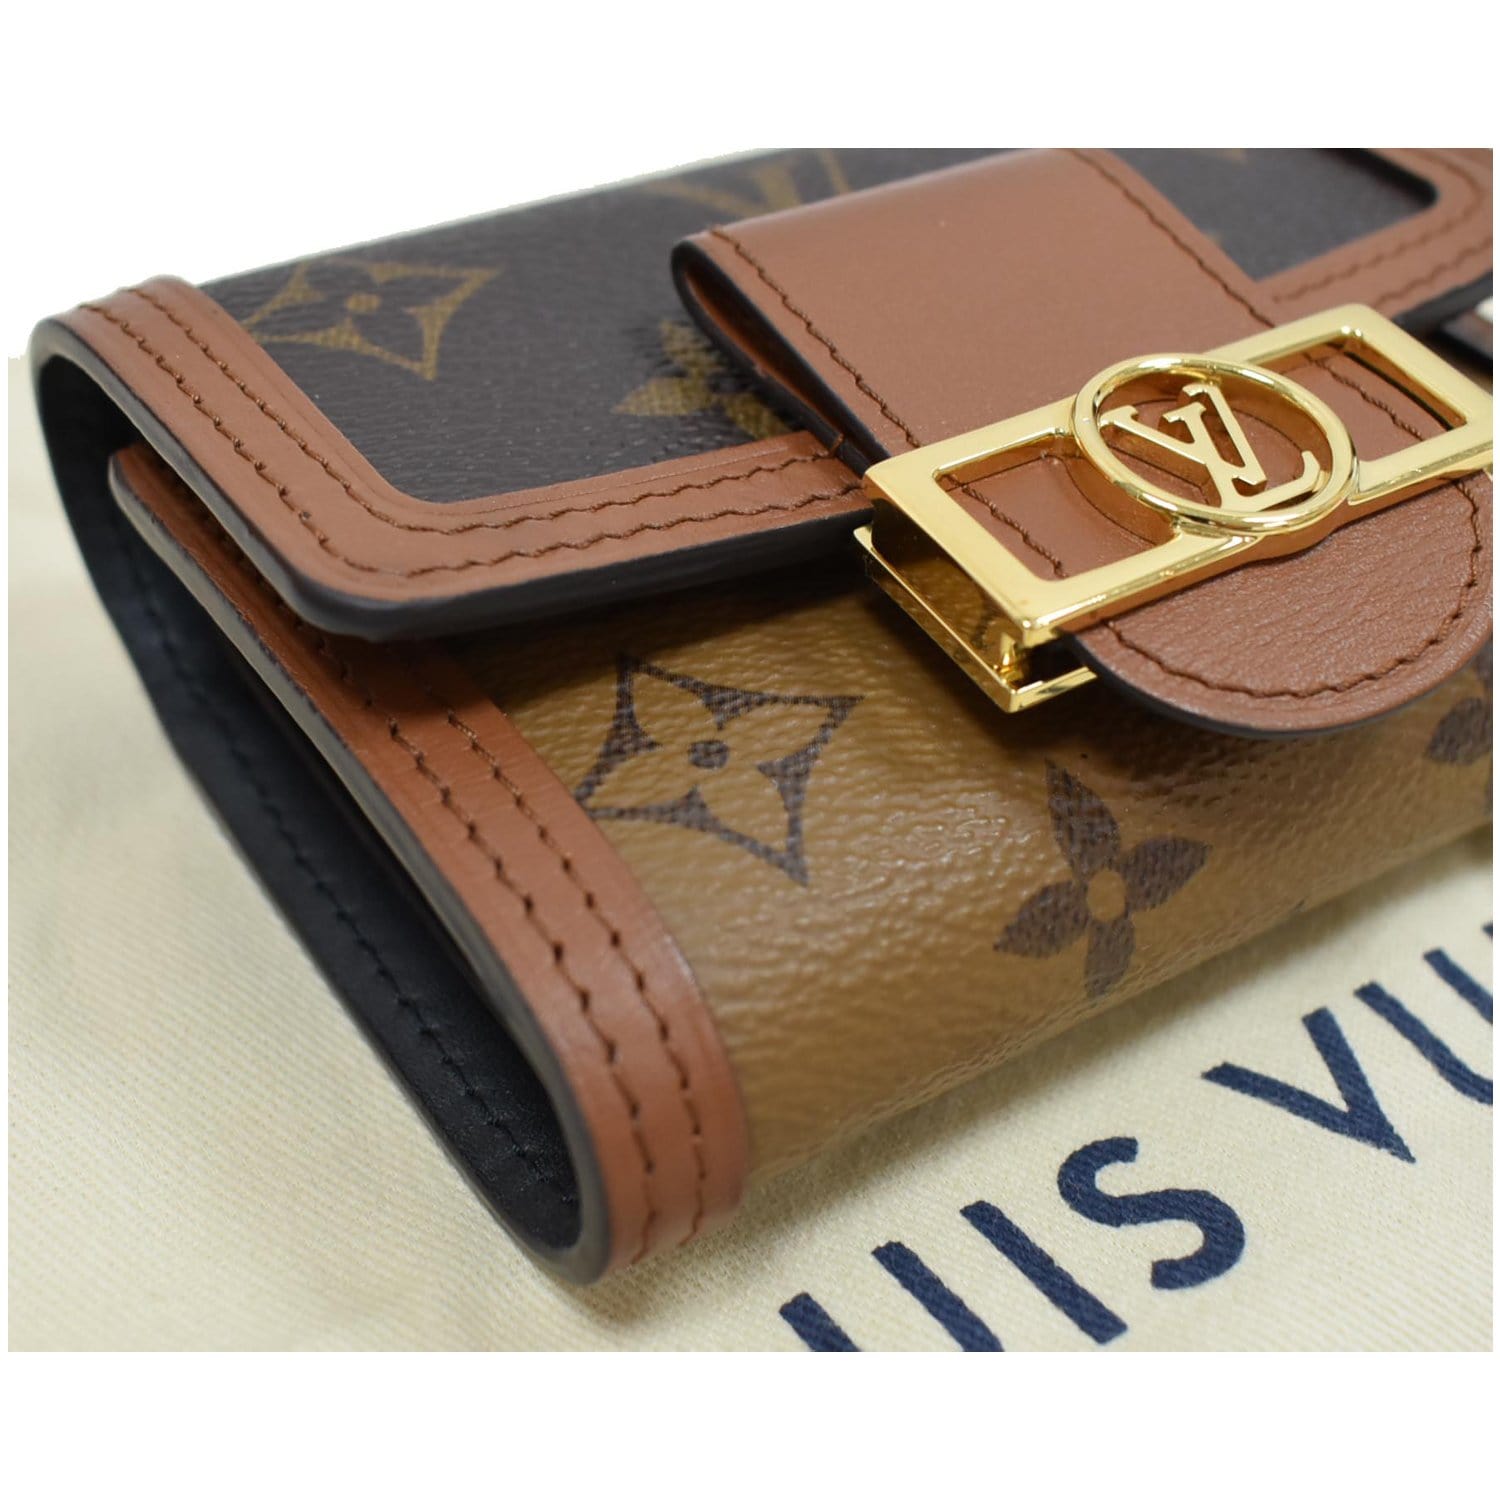 LOUIS VUITTON® Dauphine Compact Wallet  Compact wallets, Efficient wallet,  Louis vuitton key pouch